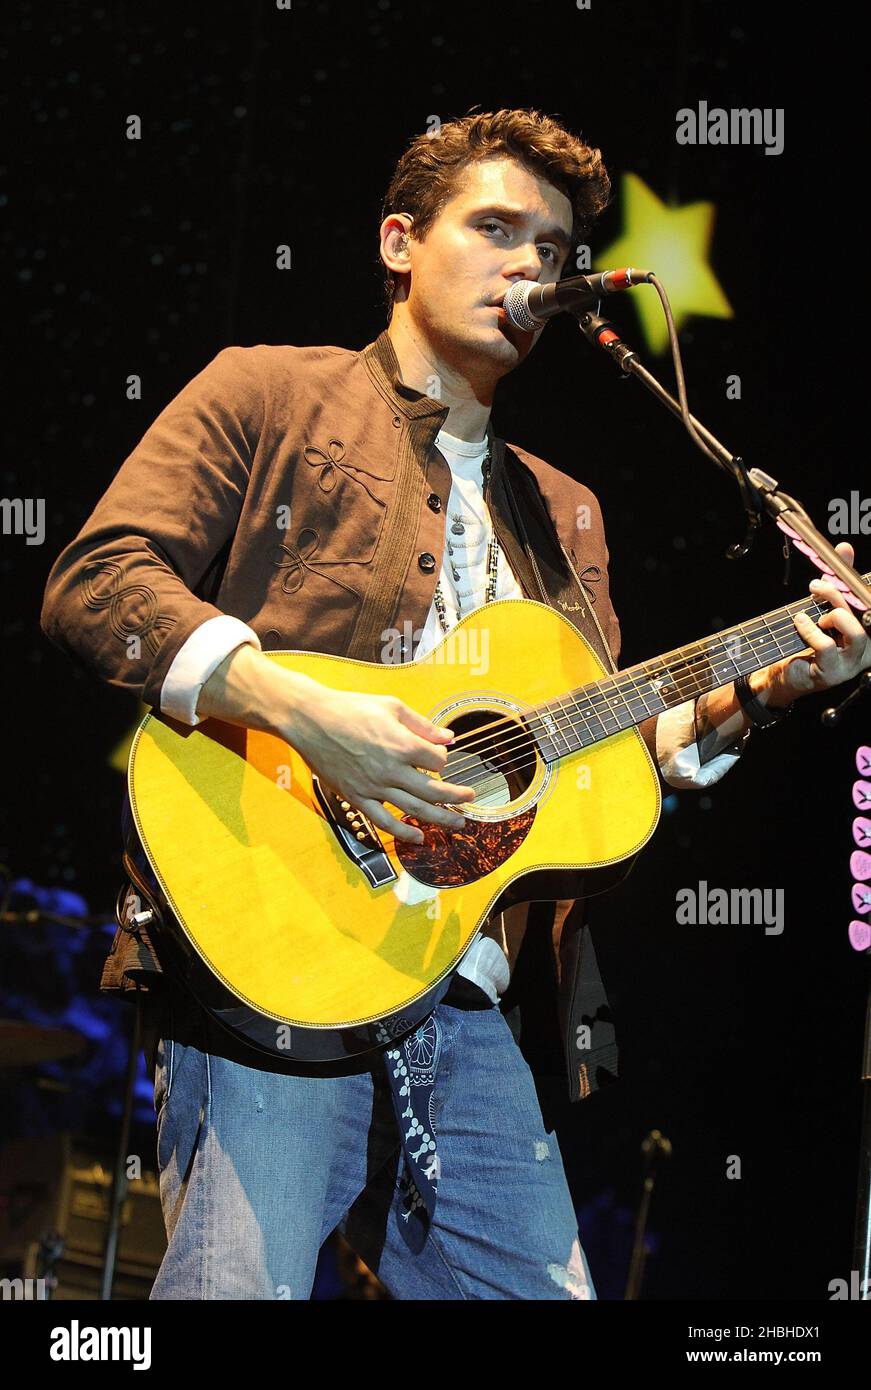 John Mayer performs on stage at the 02 Arena in London. Stock Photo